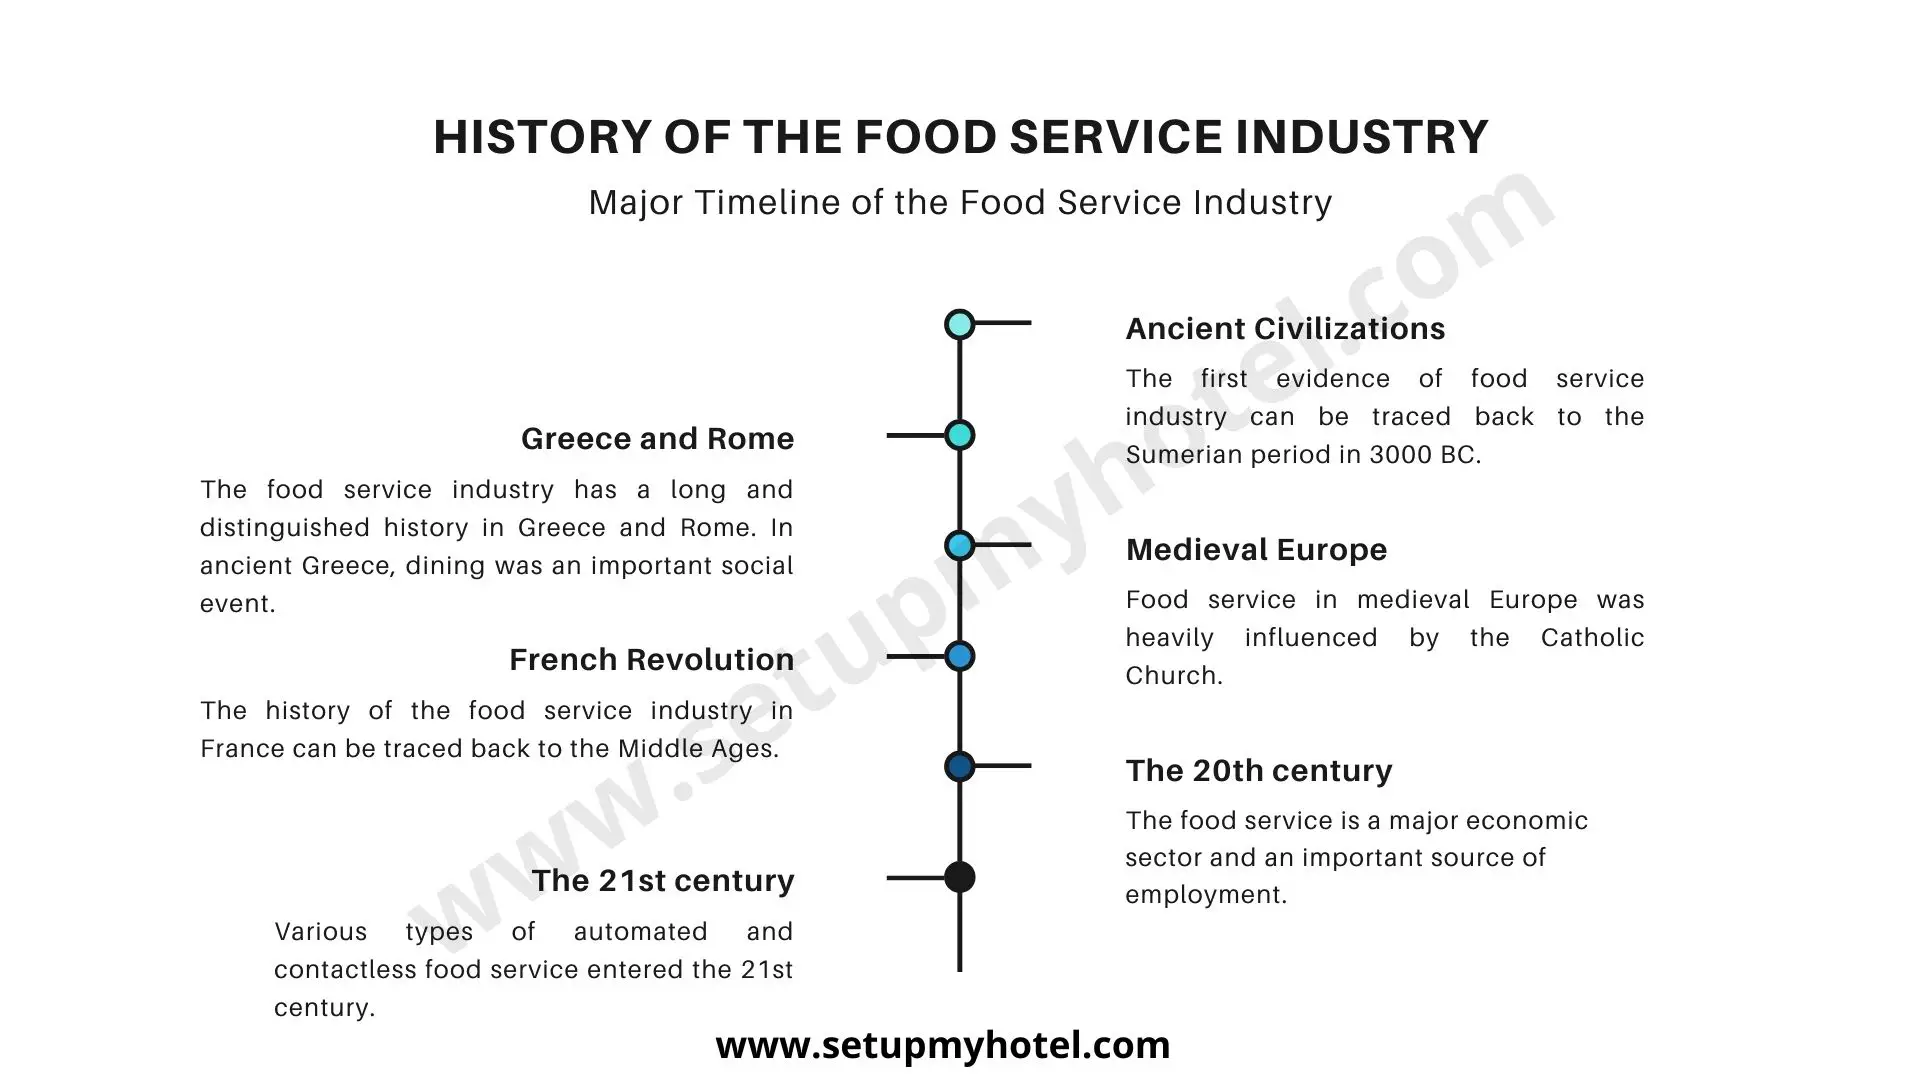 History Of The Food Service Industry. The history of the food service industry is a rich and diverse journey that spans centuries and cultures. Here is a brief overview of key developments in the evolution of the food service industry: Ancient Civilizations: The roots of the food service industry can be traced back to ancient civilizations, where inns and taverns provided meals and accommodations to travelers. Ancient Rome had thermopolia, which were establishments where hot food and drinks were sold. Medieval Europe: During the Middle Ages, the concept of the restaurant as we know it today began to take shape. Public eateries, known as "cook shops," started emerging in major European cities, offering simple meals for purchase. Renaissance: The Renaissance period saw the rise of the formal restaurant in France. In 18th-century Paris, establishments like Boulanger and Beauvilliers gained fame as places offering soups and other "restaurants" or "restoratives." Industrial Revolution: The Industrial Revolution brought significant changes to the food service industry. With urbanization and the growth of the middle class, more people sought meals outside the home. The emergence of cafes and restaurants became more widespread. Railroad and Travel: The expansion of railroads and travel in the 19th century further fueled the food service industry. Railway dining cars and station restaurants catered to travelers, contributing to the standardization of meals. 20th Century: Fast food gained prominence in the mid-20th century with the rise of chains like McDonald's, KFC, and Burger King. This era also saw the development of the franchise model, leading to the globalization of certain food service brands. Fine Dining and Culinary Excellence: In the latter half of the 20th century, the food service industry witnessed a surge in fine dining establishments. Renowned chefs like Julia Child and the rise of culinary schools contributed to a greater emphasis on culinary excellence. Technology and Delivery: The late 20th century and early 21st century brought technological advancements, influencing the food service industry. Online ordering, food delivery apps, and digital marketing became integral components of many establishments. Health and Sustainability Trends: In recent years, there has been a growing emphasis on health-conscious eating, organic ingredients, and sustainable practices. Consumers are increasingly interested in the source of their food and its impact on the environment. Globalization: The food service industry has become highly globalized, with a fusion of culinary influences from around the world. International cuisines are more accessible, and restaurants often showcase diverse culinary traditions. Pandemic Impact: The COVID-19 pandemic significantly impacted the food service industry, leading to increased reliance on takeout and delivery services, the adoption of contactless technologies, and a renewed focus on safety and hygiene. The history of the food service industry reflects societal changes, technological advancements, and evolving consumer preferences. From humble beginnings to a complex and diverse landscape, the industry continues to adapt and innovate in response to shifting trends and demands.